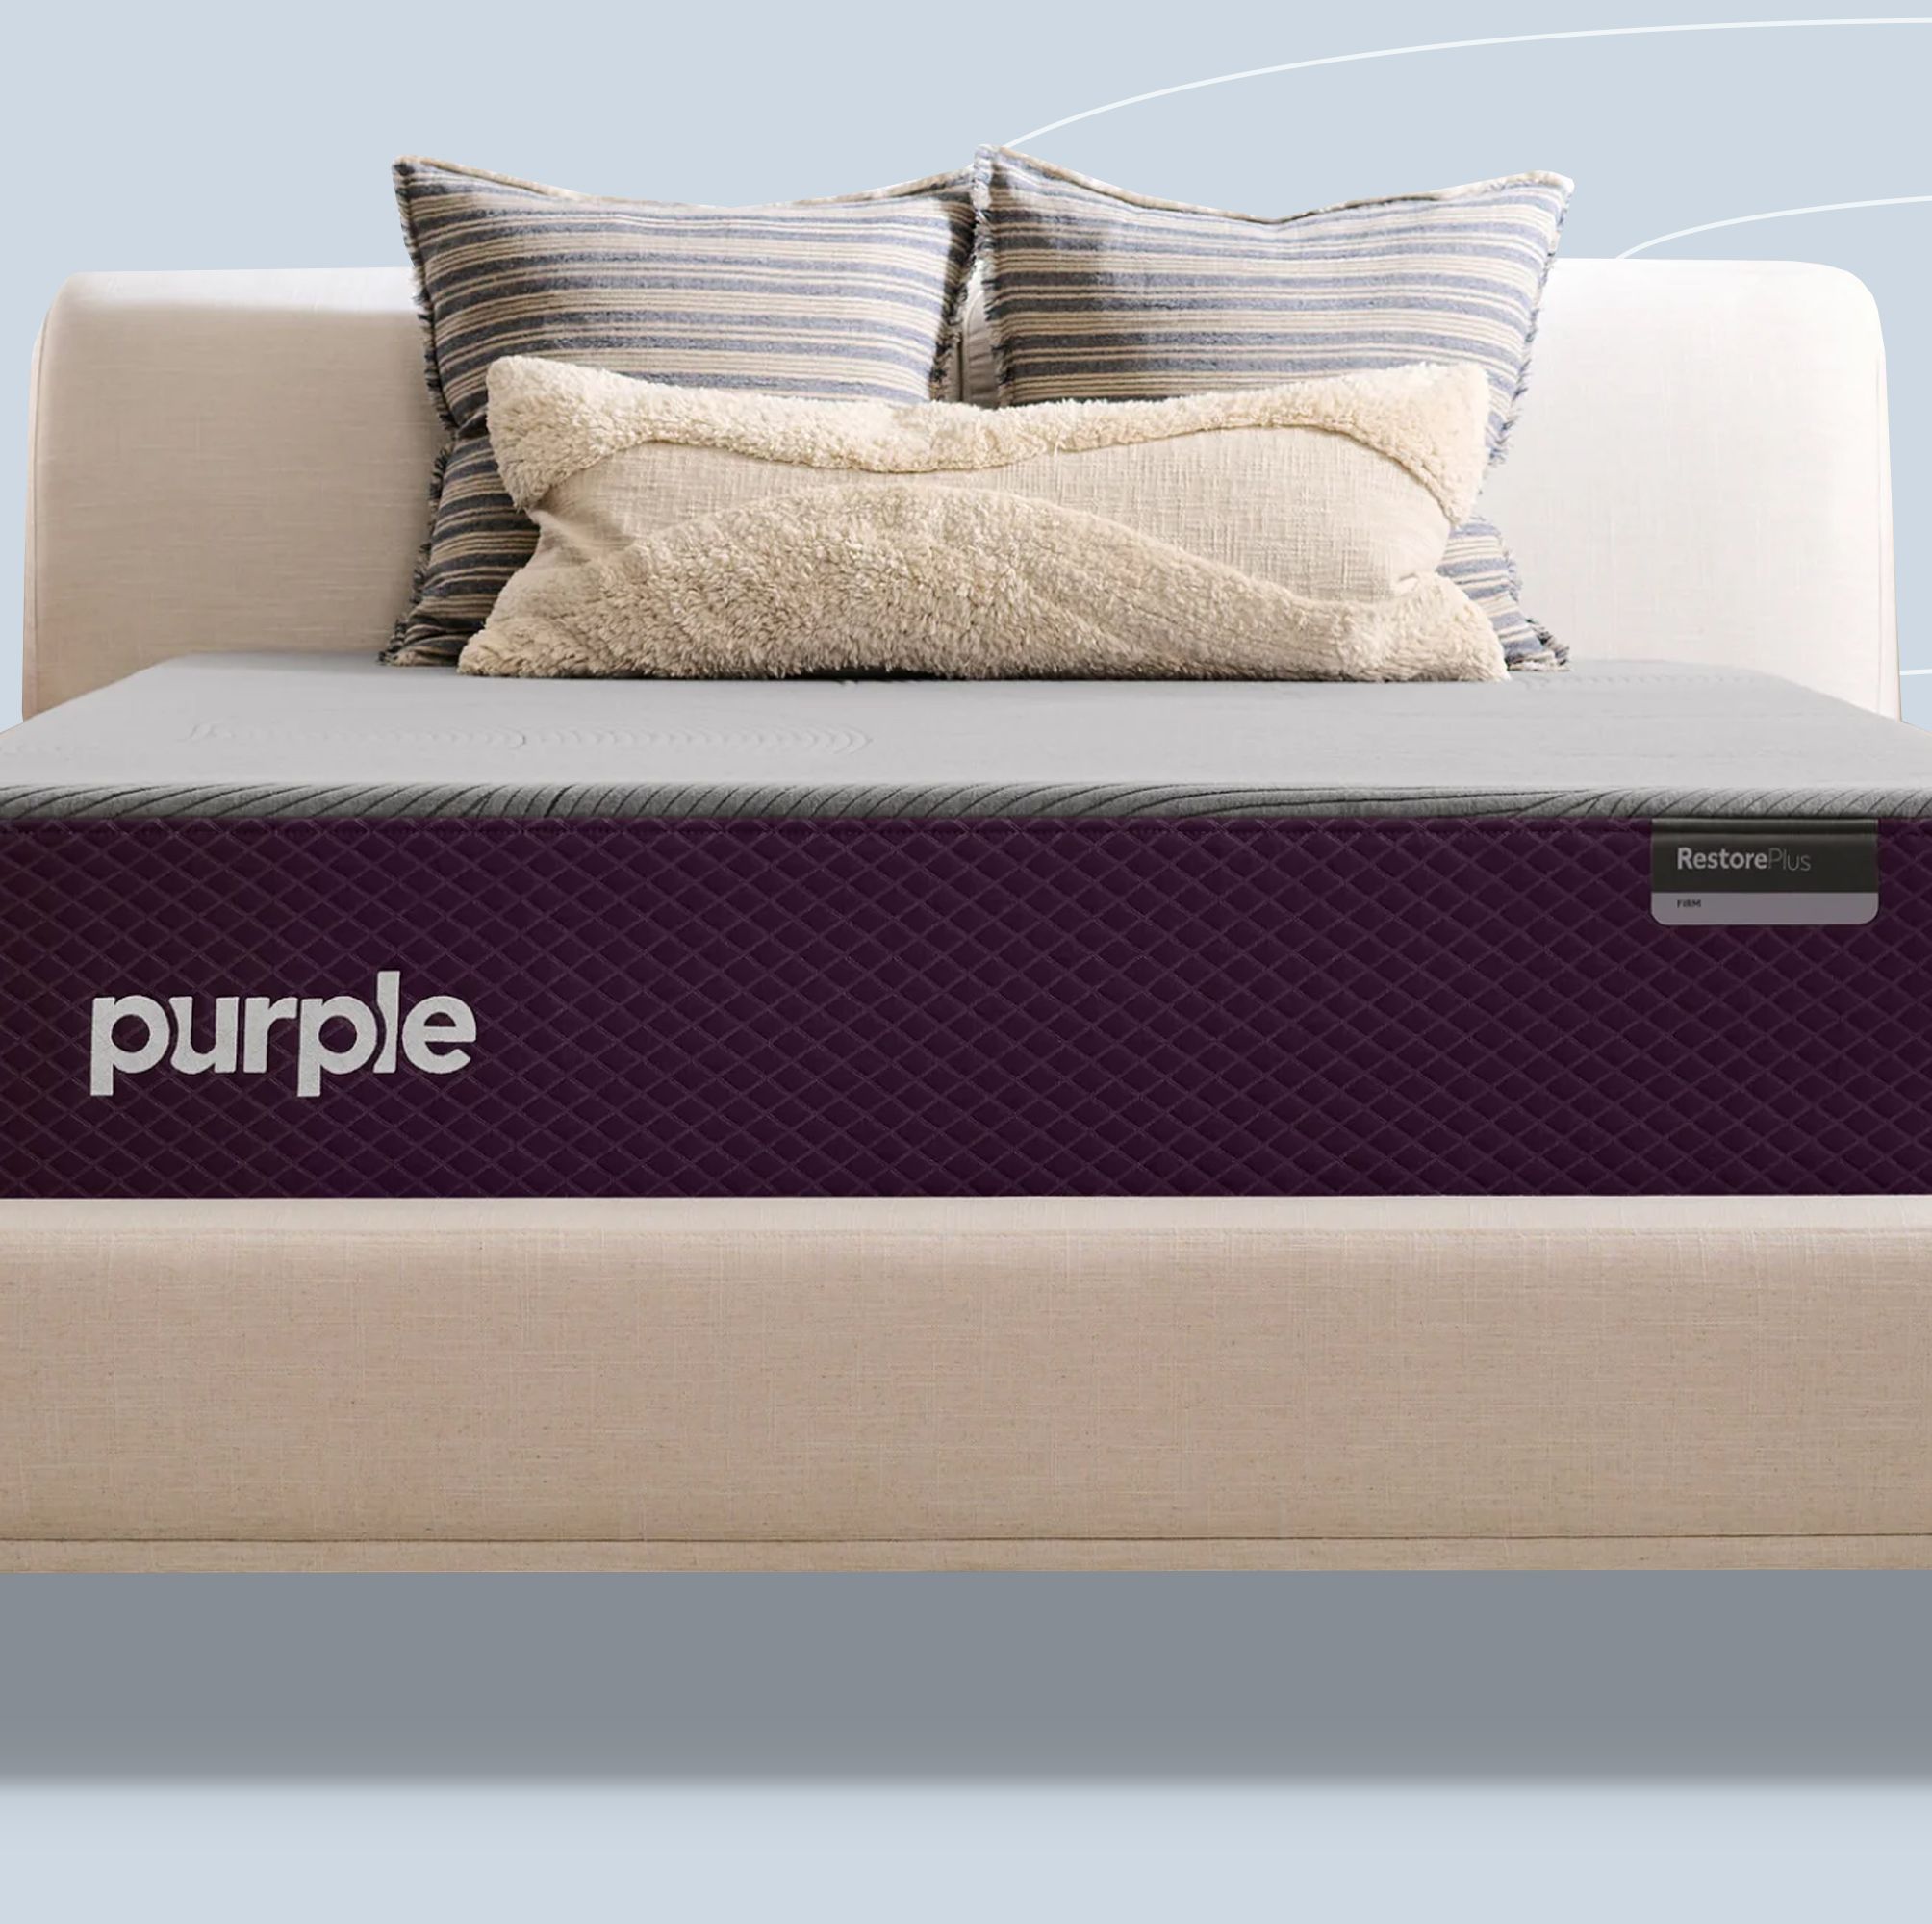 6 Hybrid Mattresses That Offer a Blend of Soft and Supportive Sleep